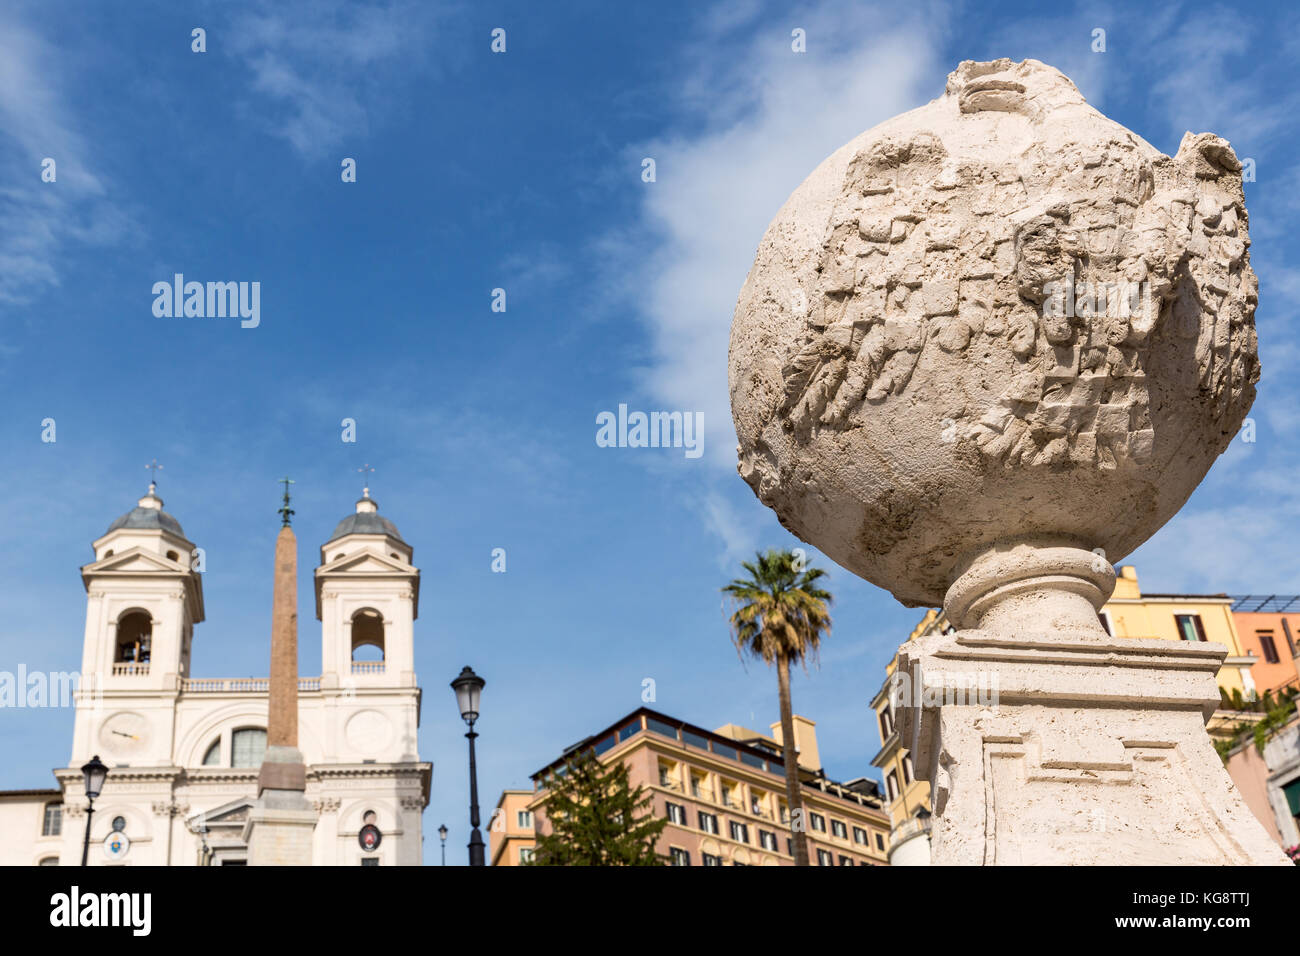 Details from the Spanish steps stair rail and the church of the Santissima Trinità dei Monti in the background, Rome, Italy Stock Photo